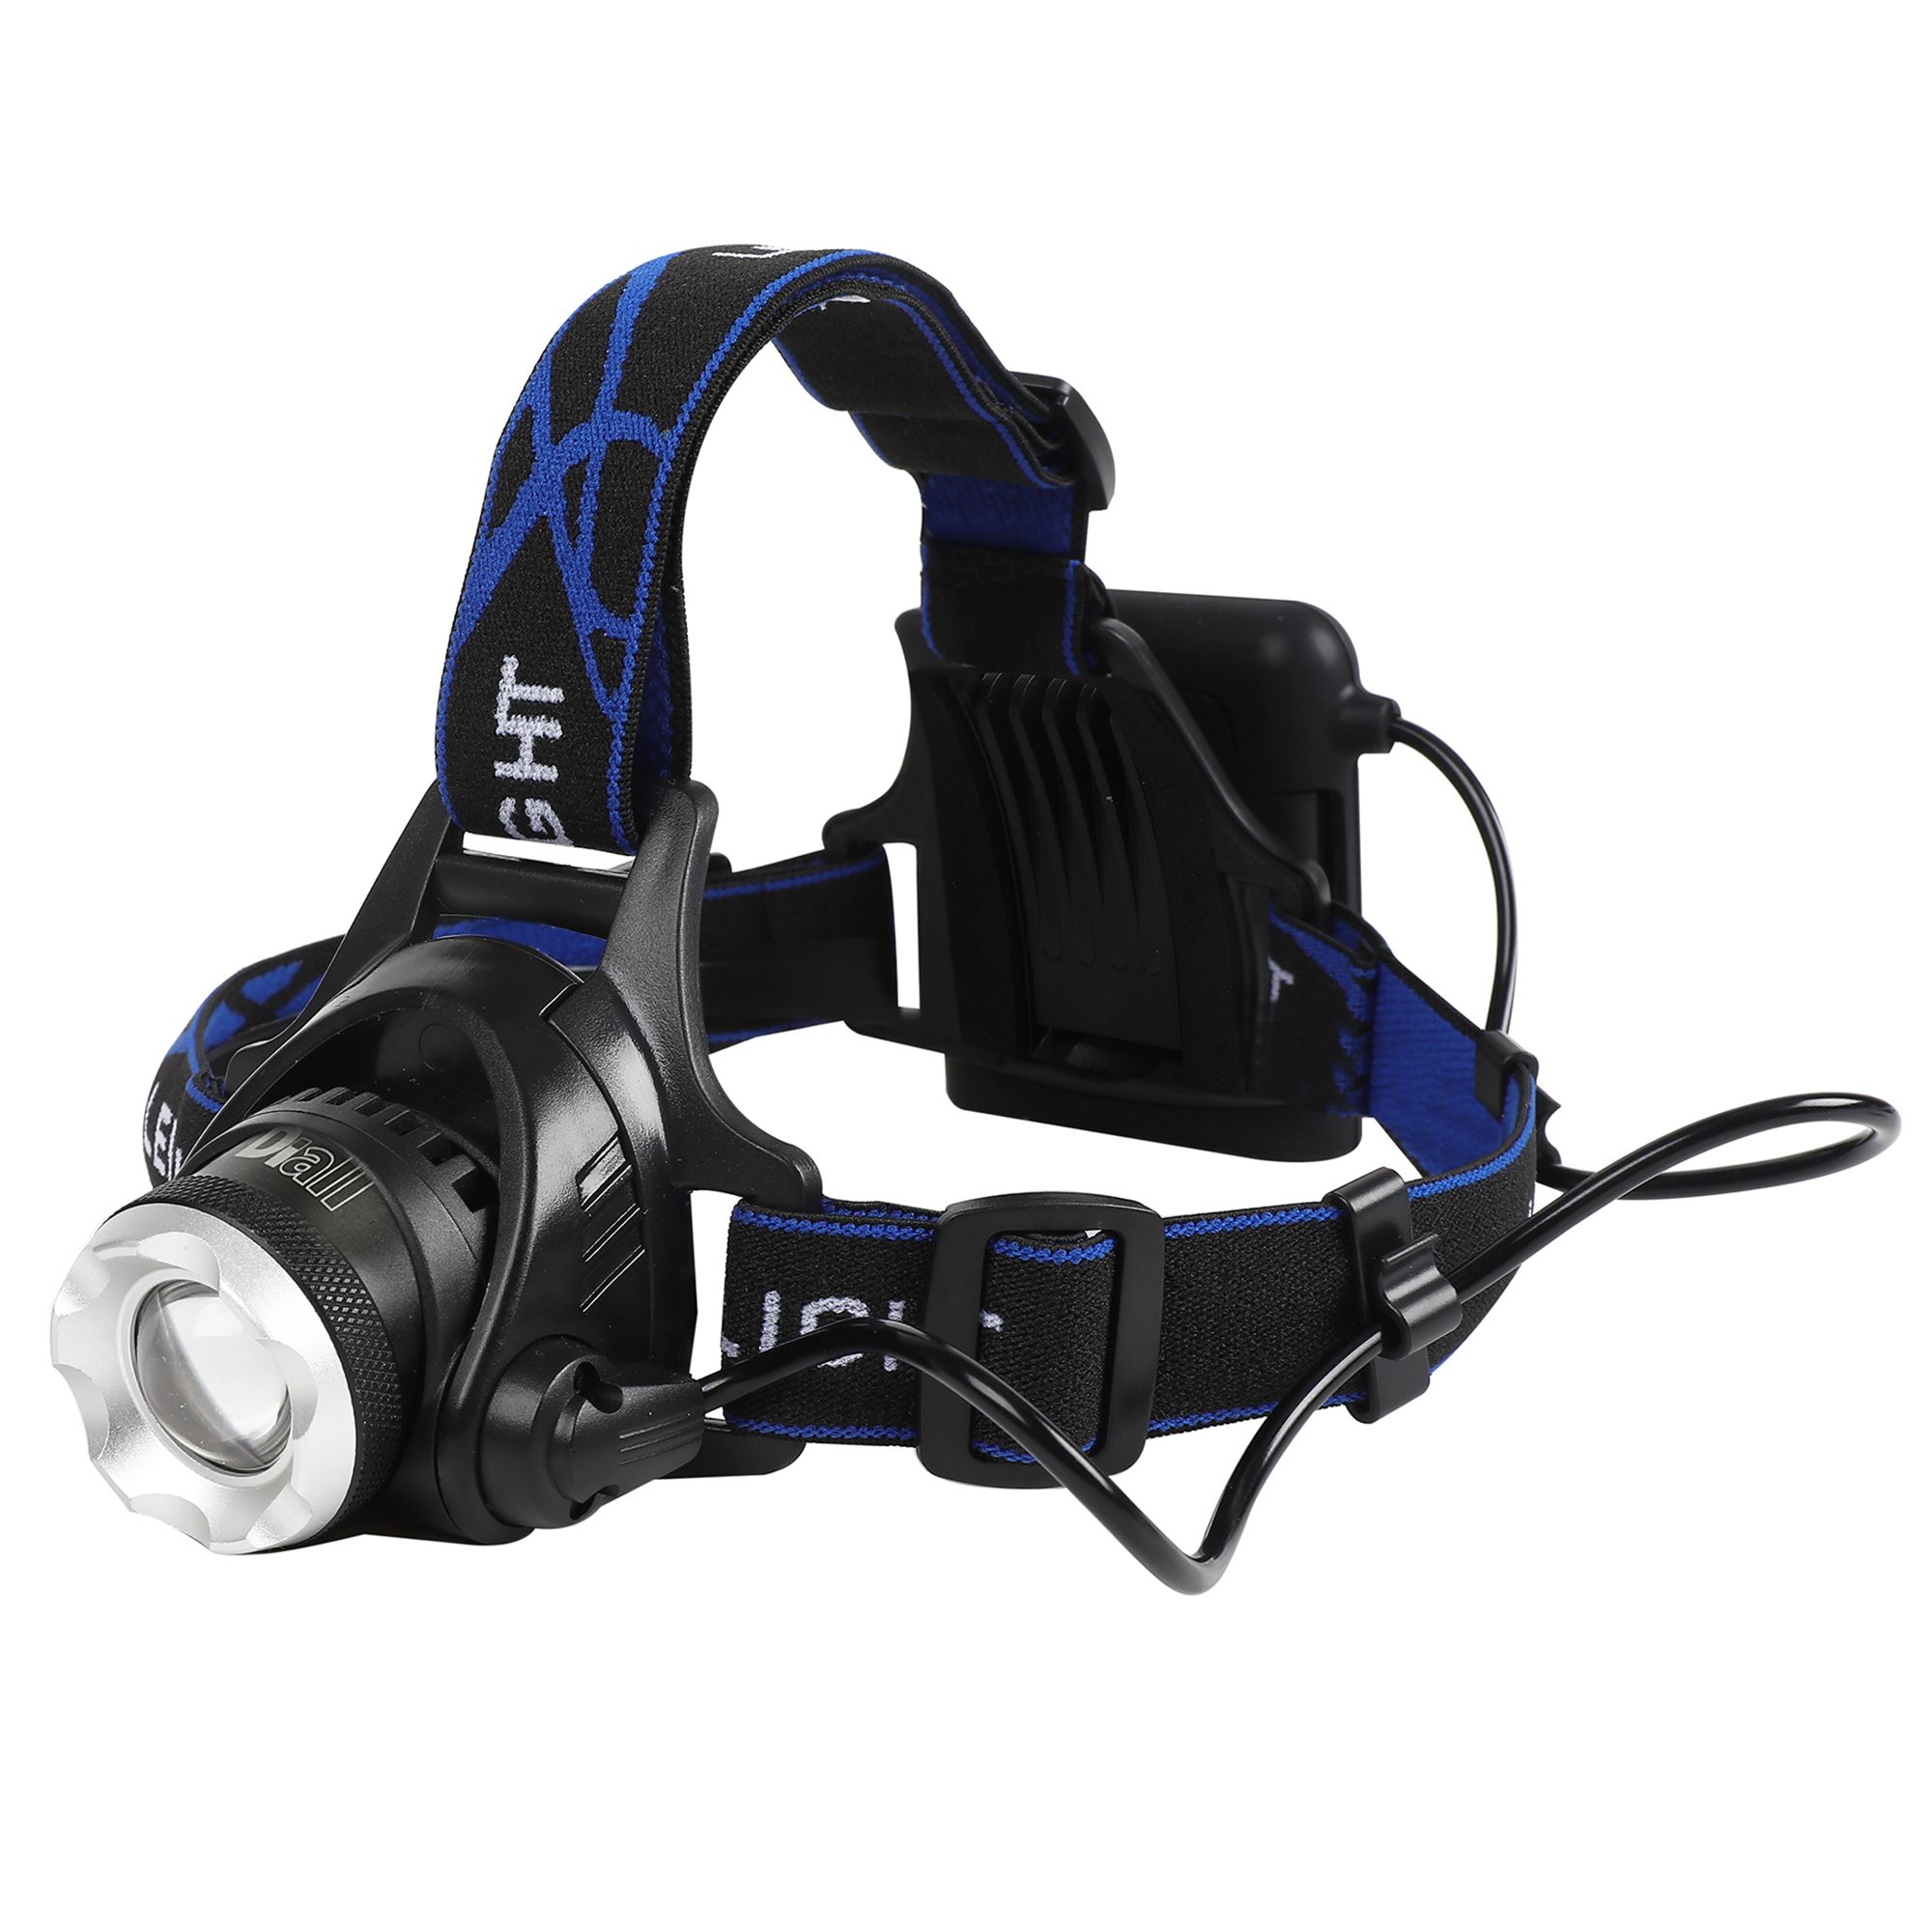 Lampe frontale Diall 120 lumens